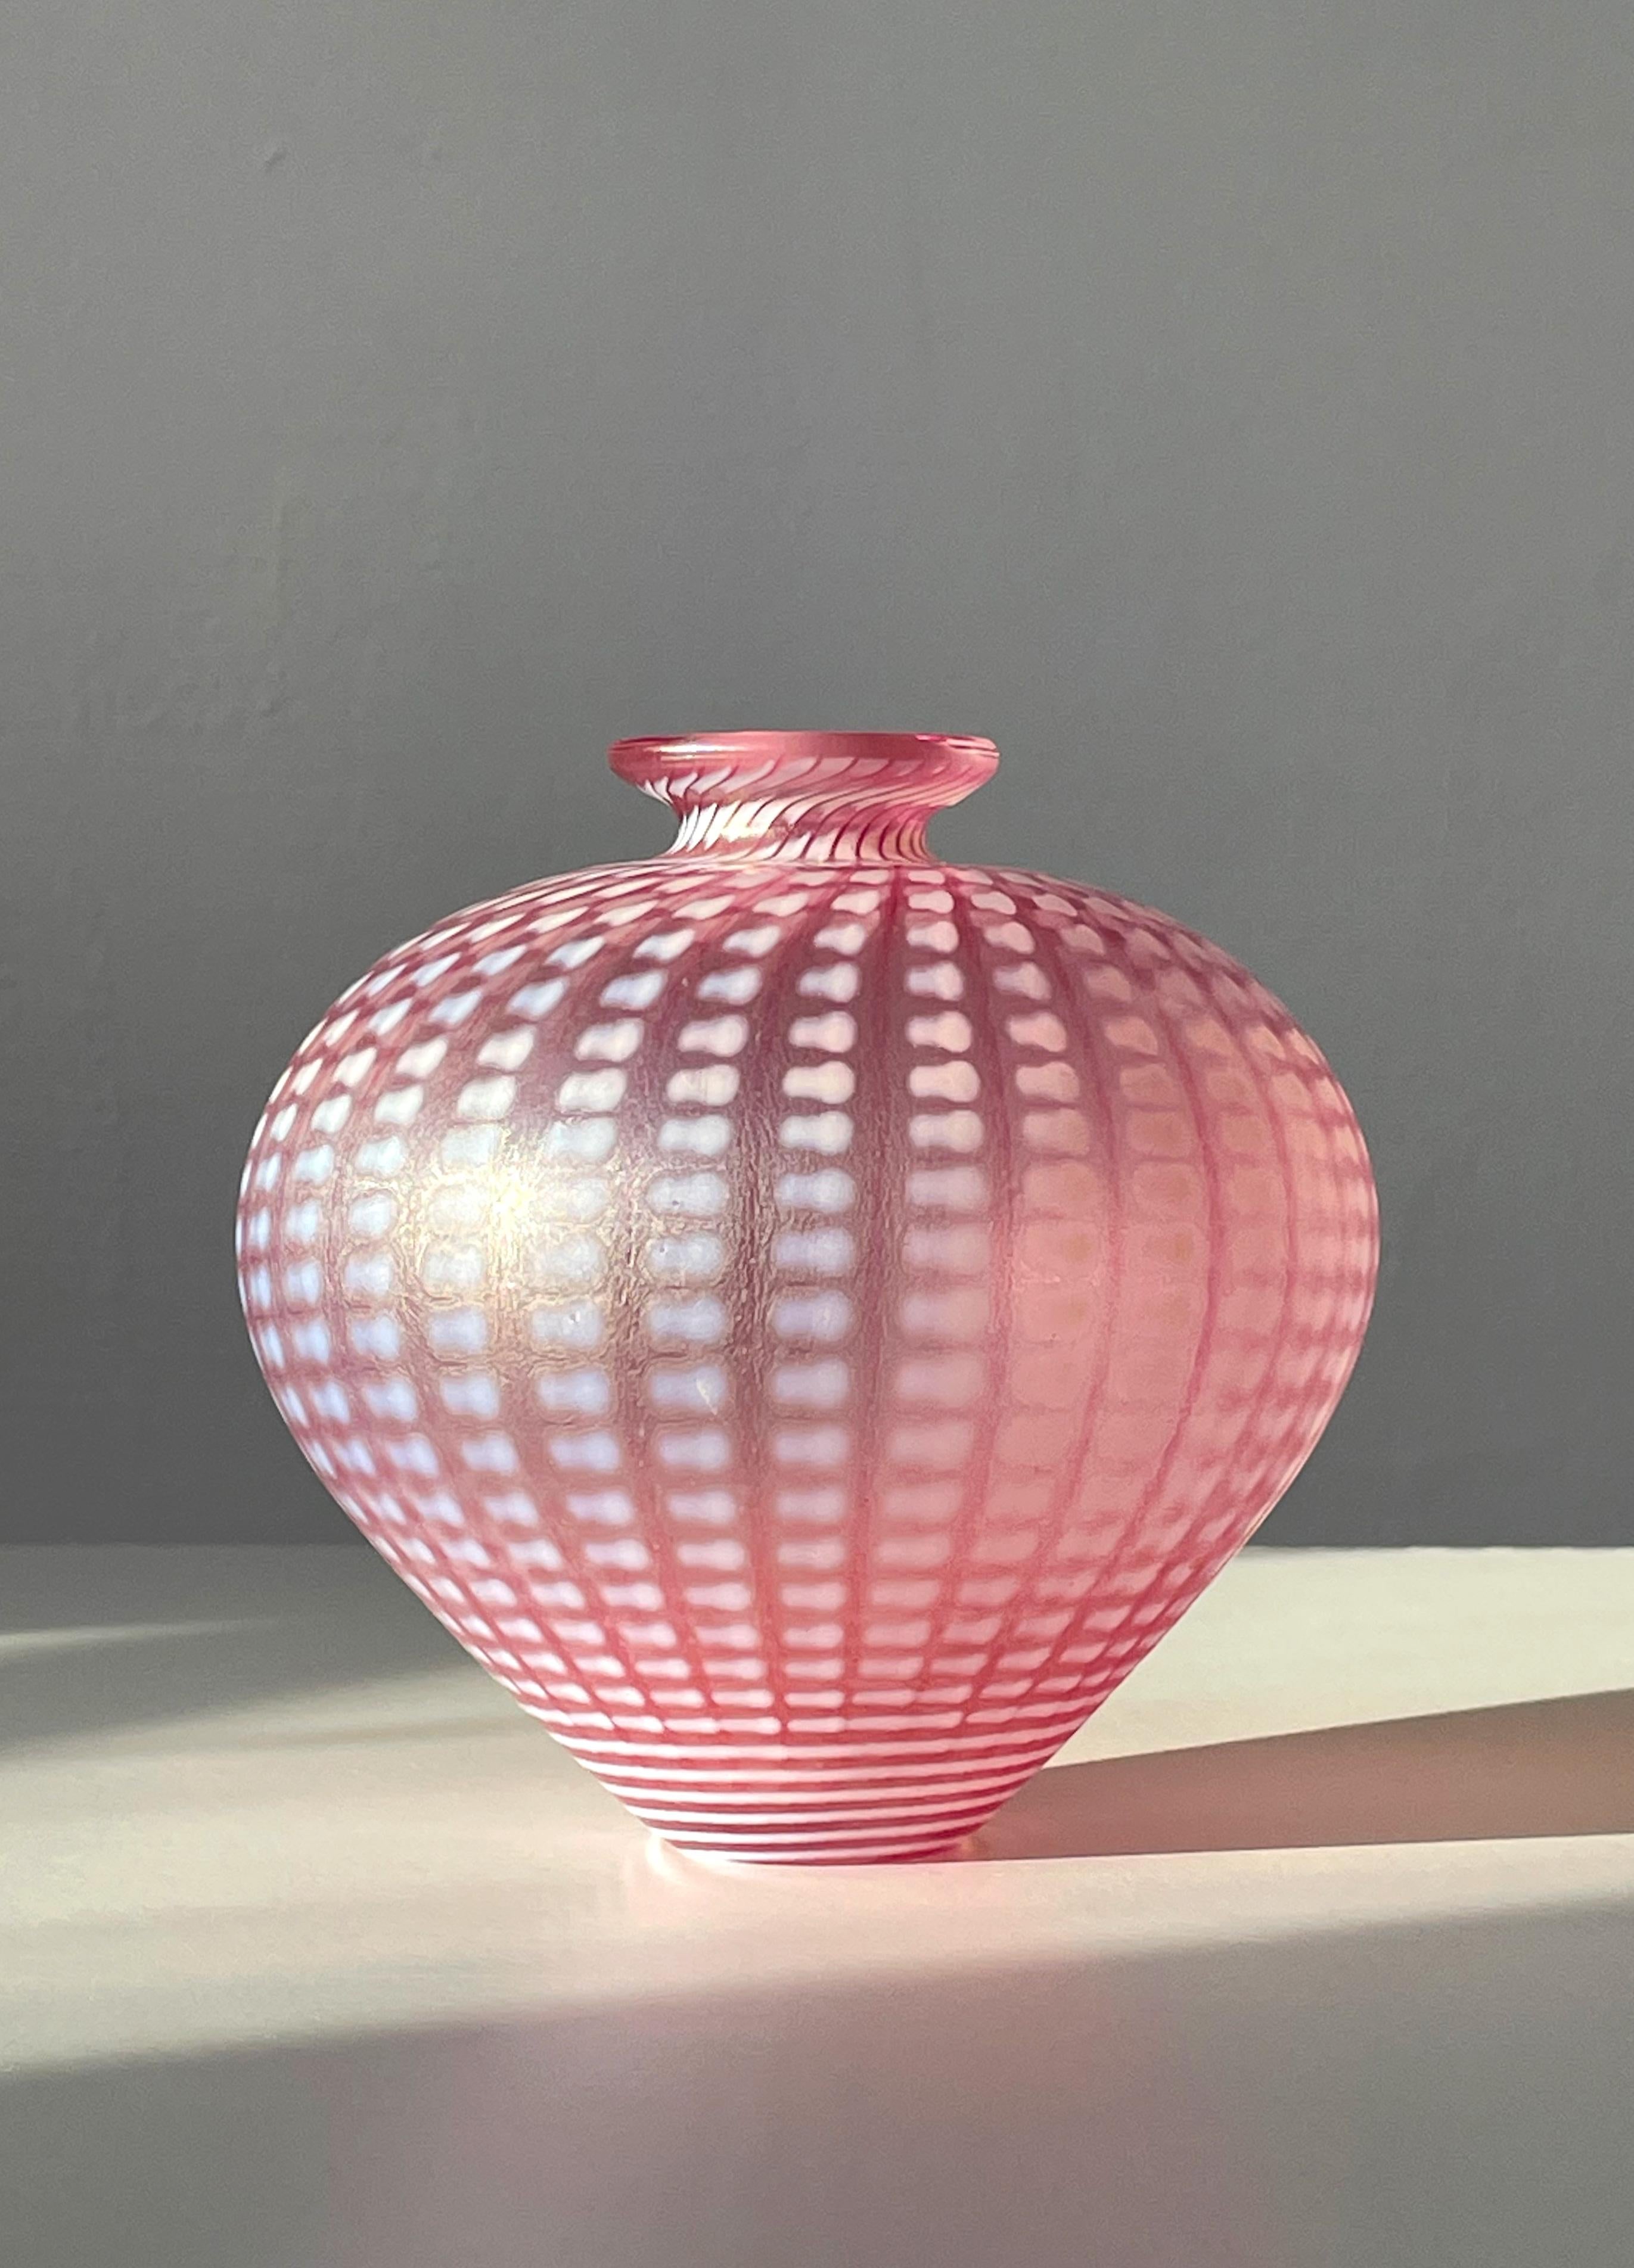 Exquisite rose pink and white art glass vase from the 1984 Minos series by Bertil Vallien for the Kosta Boda Artist Collection. Slim neck and narrow base under a swelling voluptuous body with an iridescent surface and a mother of pearl sheen over